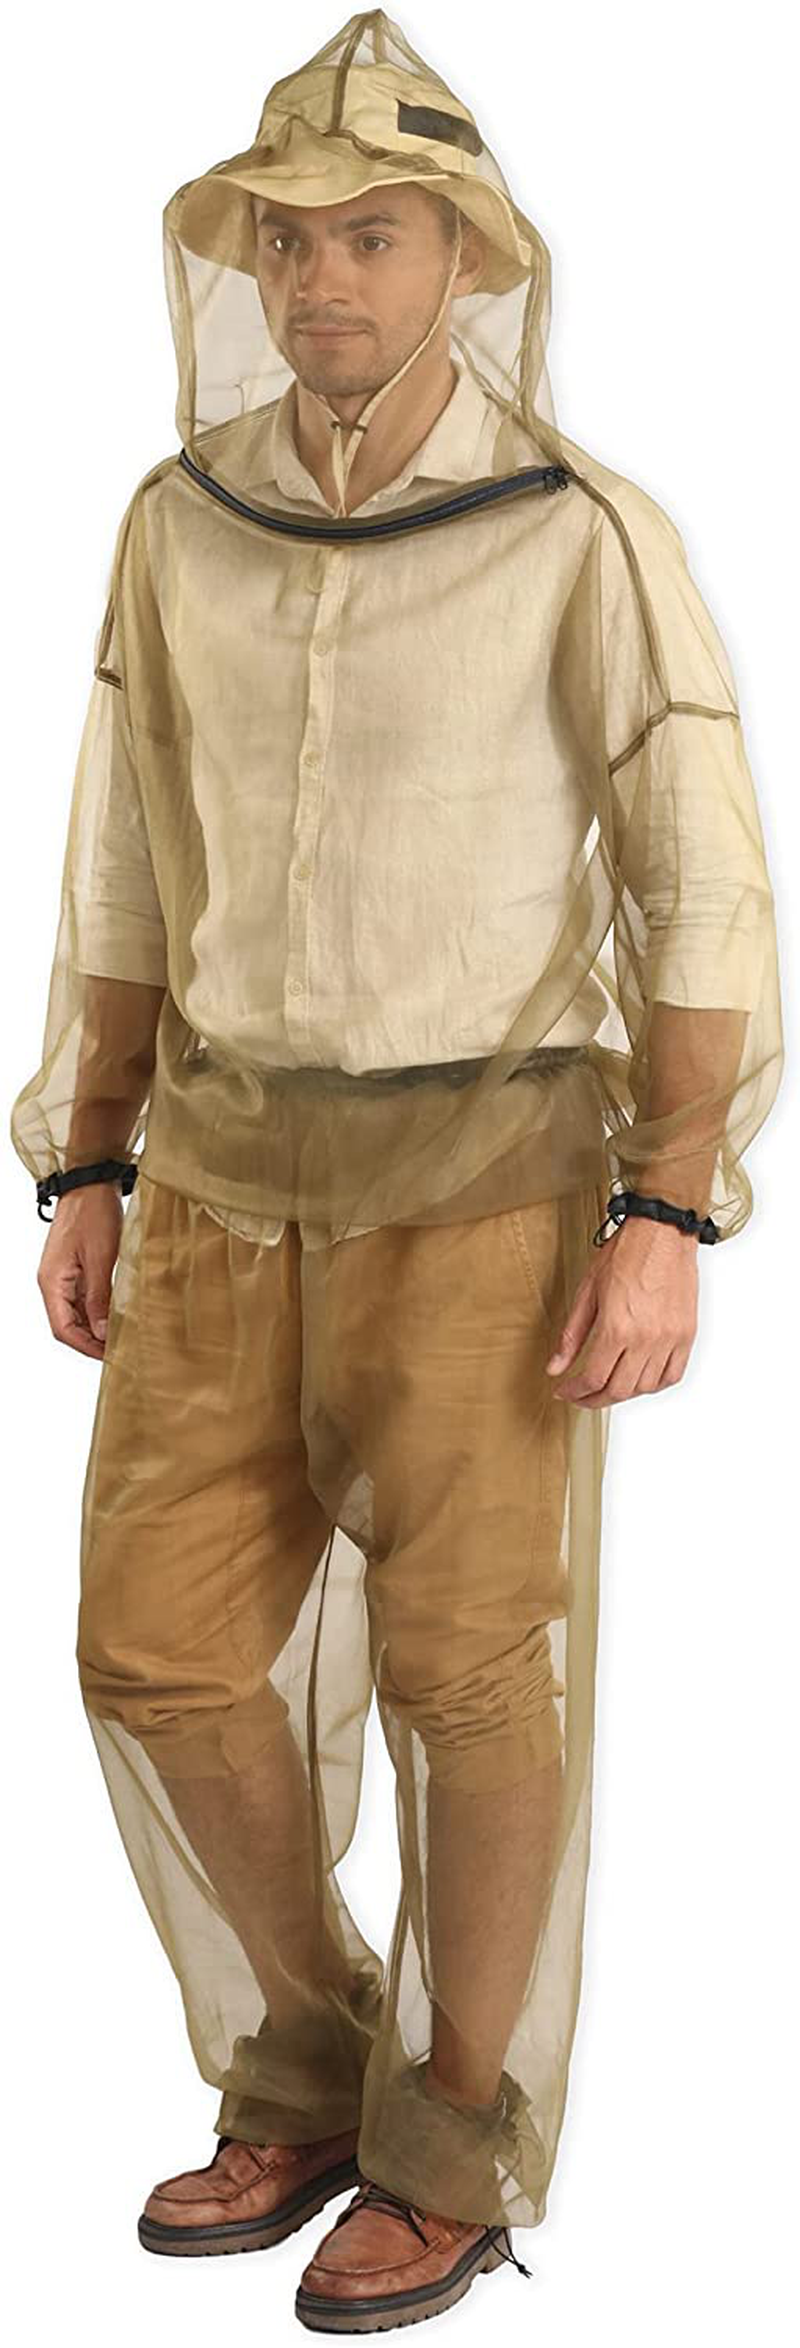 Mosquito Pants - Net Bug Pants & Mesh Bug Pants for Outdoor Protection from Bugs, Flies, Gnats, No-See-Ums & Midges - Mosquito Proof Clothing for Men & Women - W/ Free Carry Pouch Sporting Goods > Outdoor Recreation > Camping & Hiking > Mosquito Nets & Insect Screens Tough Outdoors Jacket + Pants Set - Large / X-large  